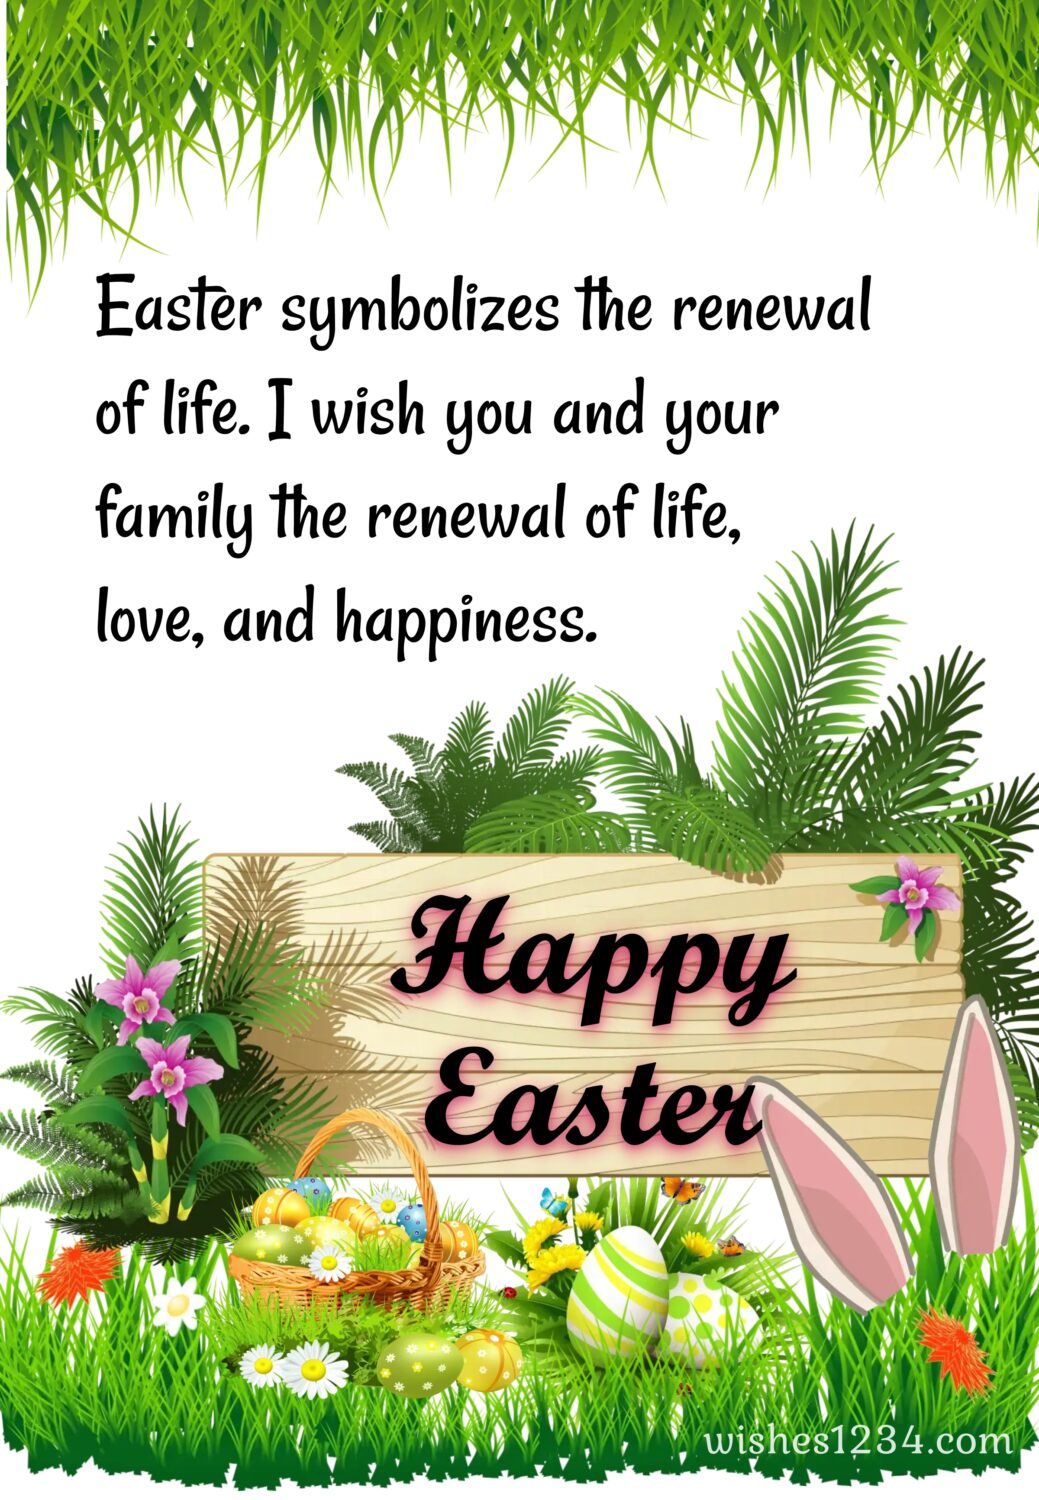 Easter greetings on wooden board, Happy Easter Wishes, Quotes & Images.